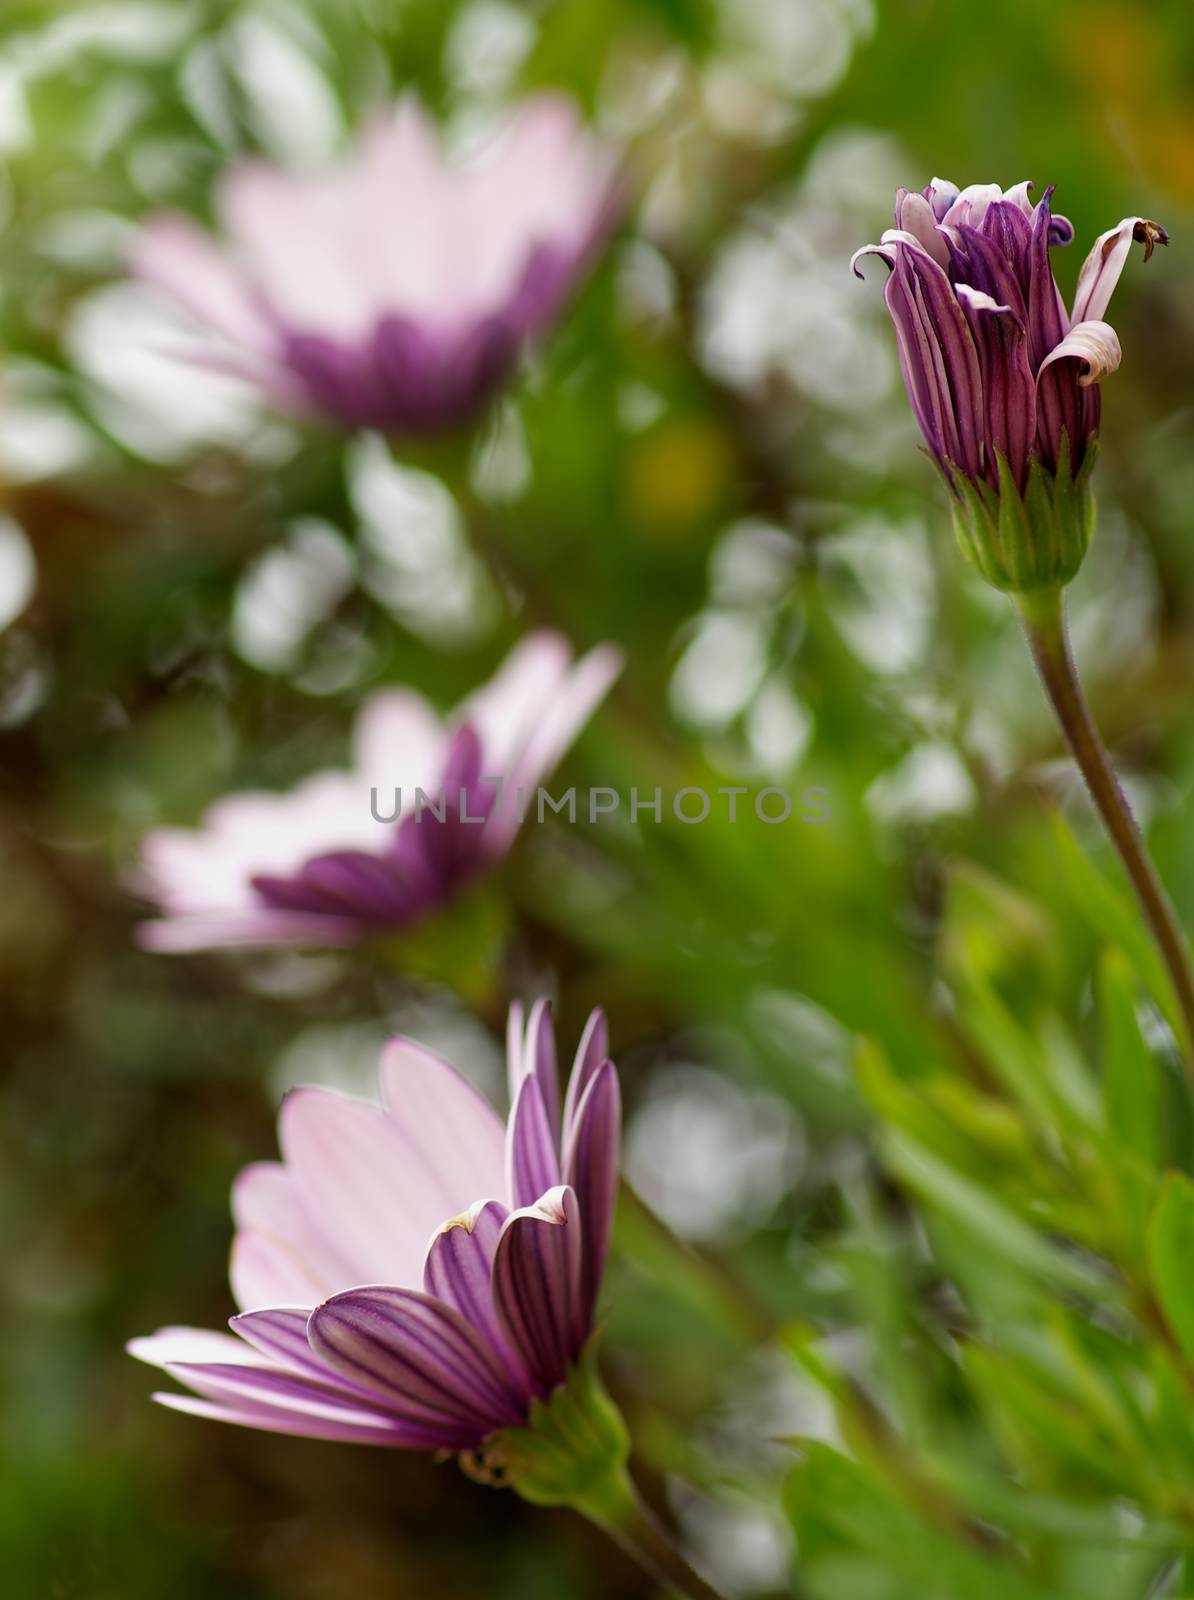 Beauty Purple and Pink Garden Daisy Flowers on Blurred Flower and Leafs background Outdoors